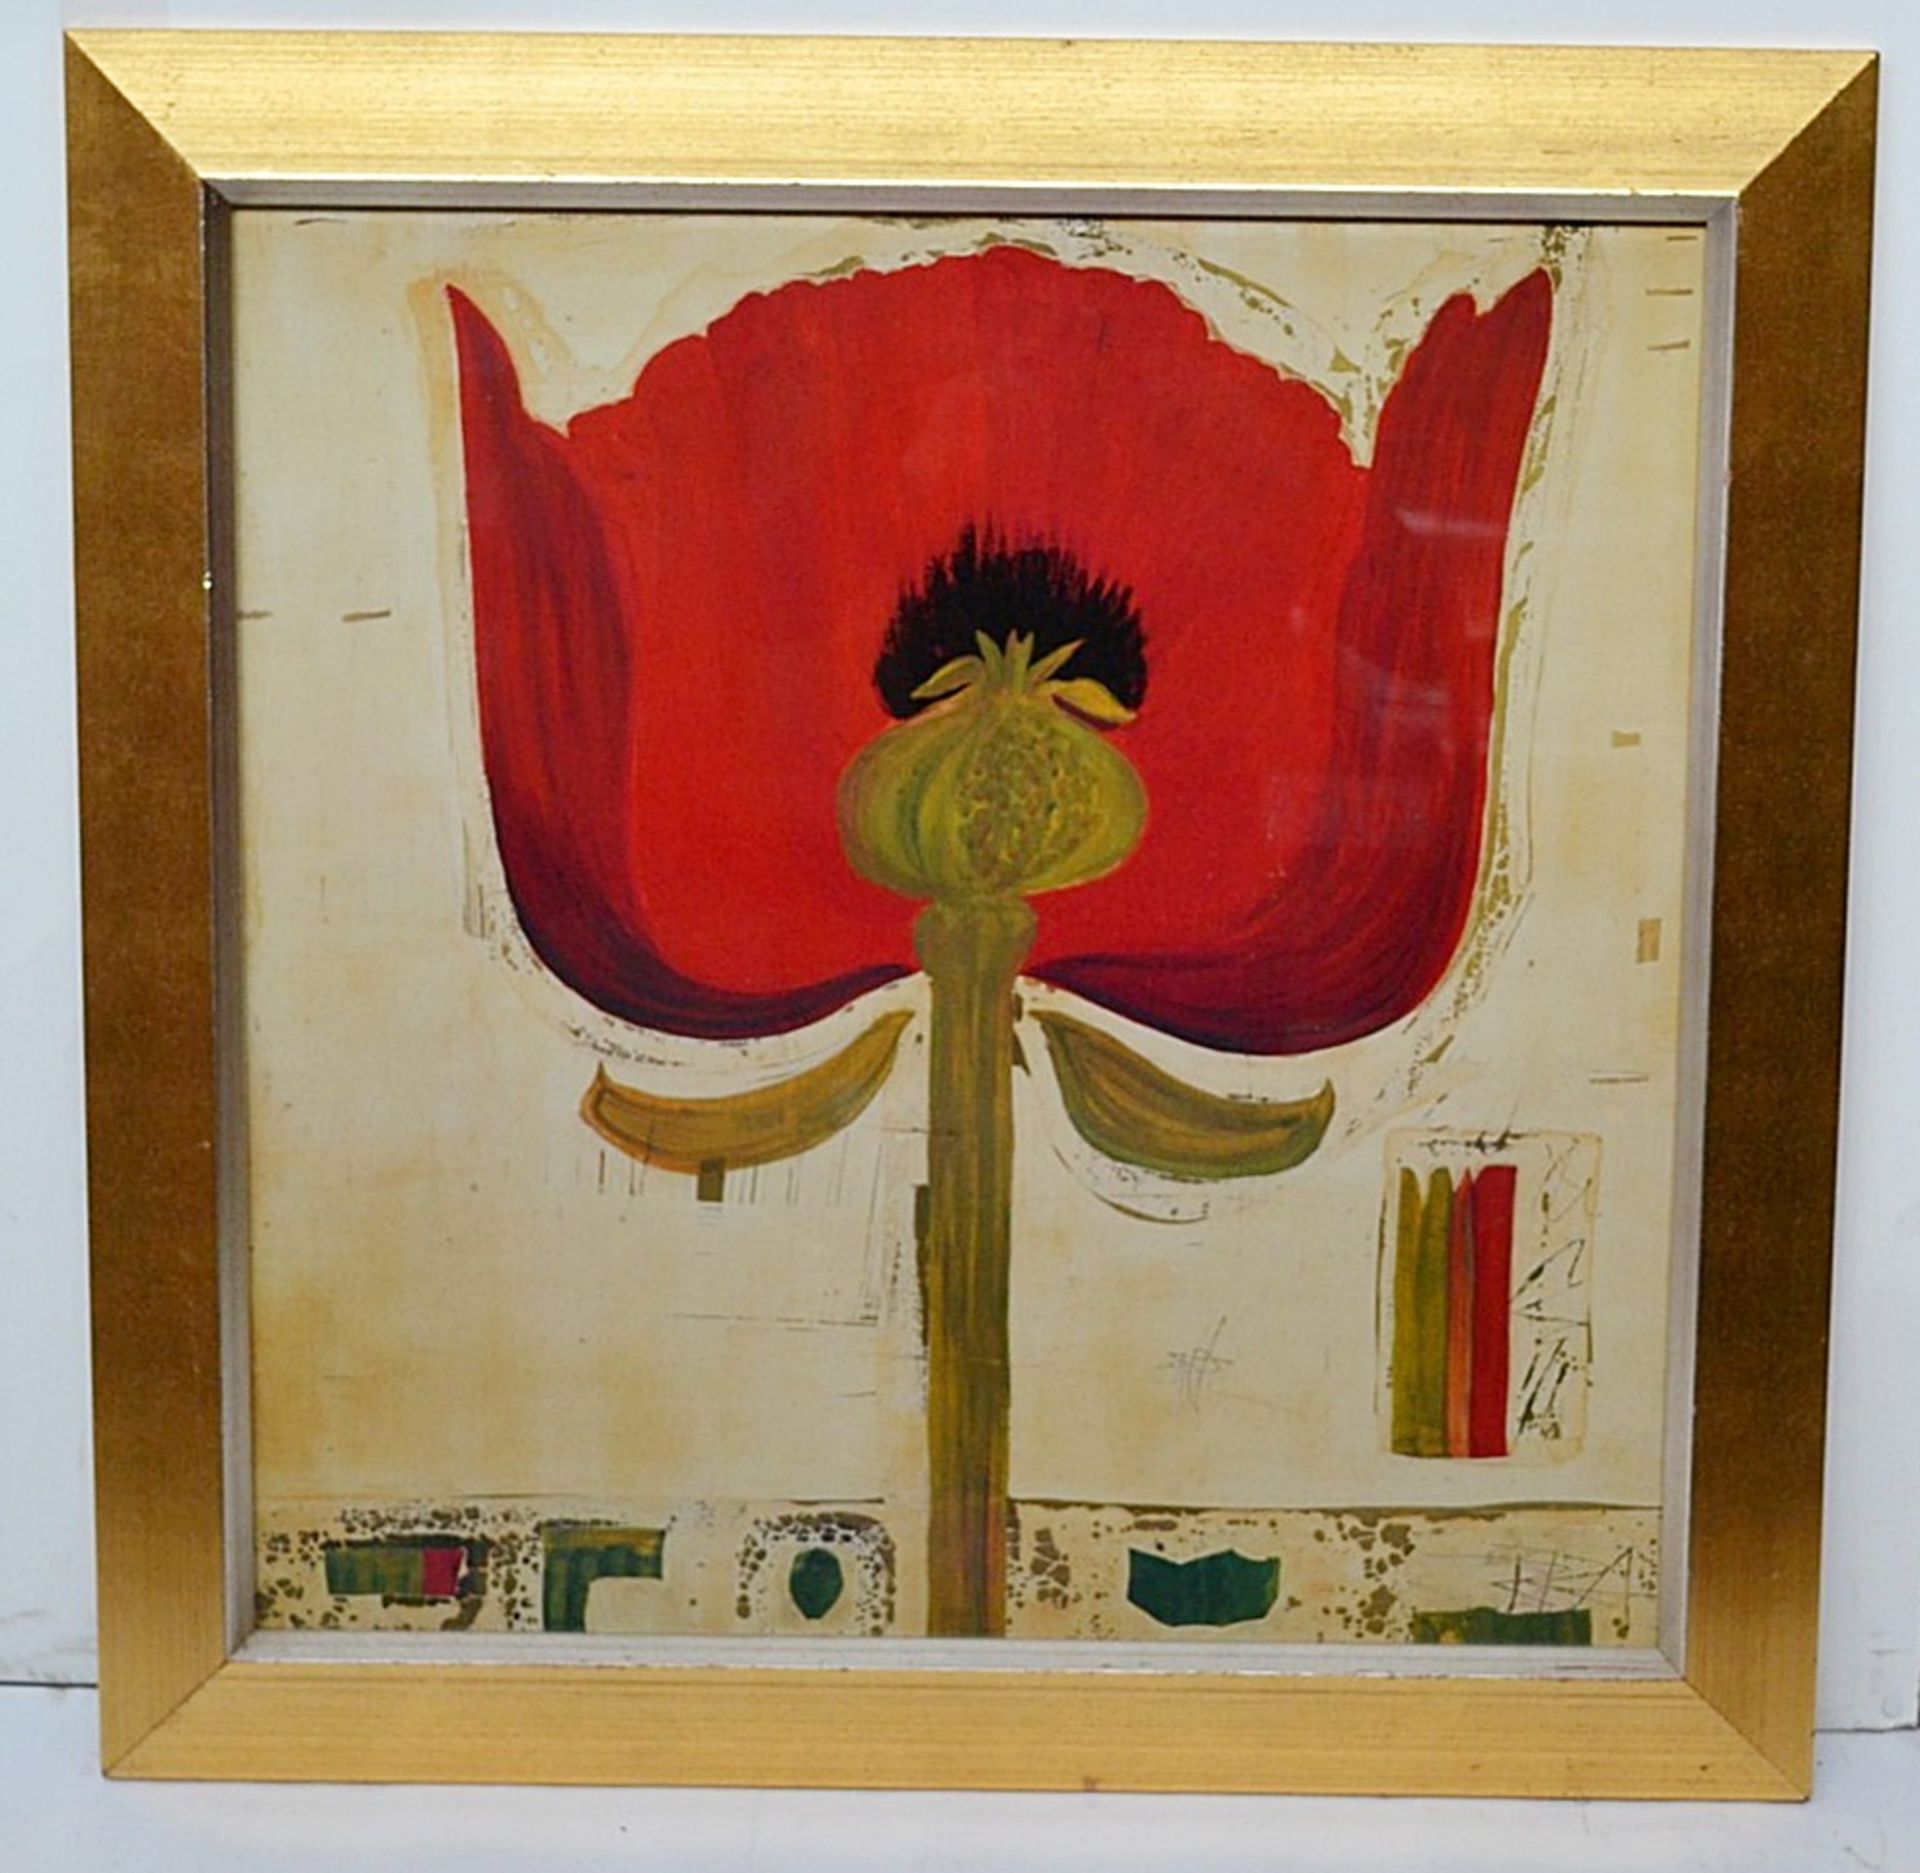 1 x Large Framed Abstract Floral Art Print By R. Richter Armgart - Dimensions: 85 x 85cm - Taken